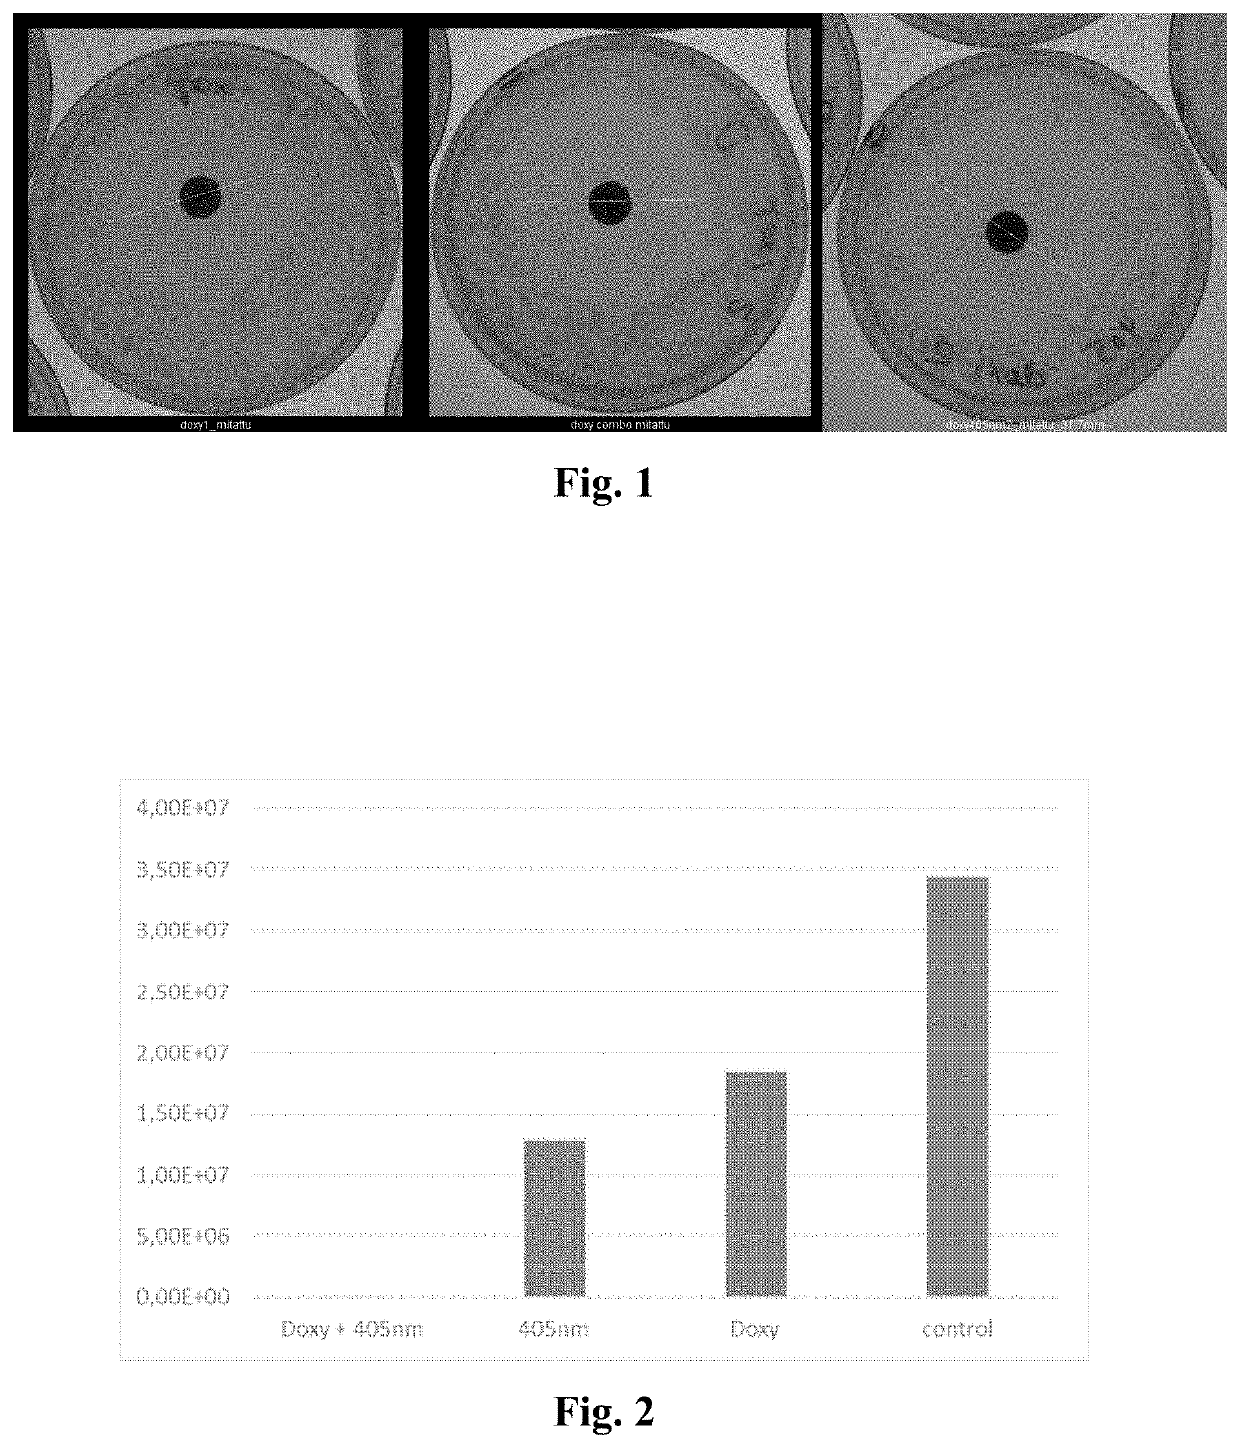 Method of enhancing the antimicrobial action of systemically administered antibiotics